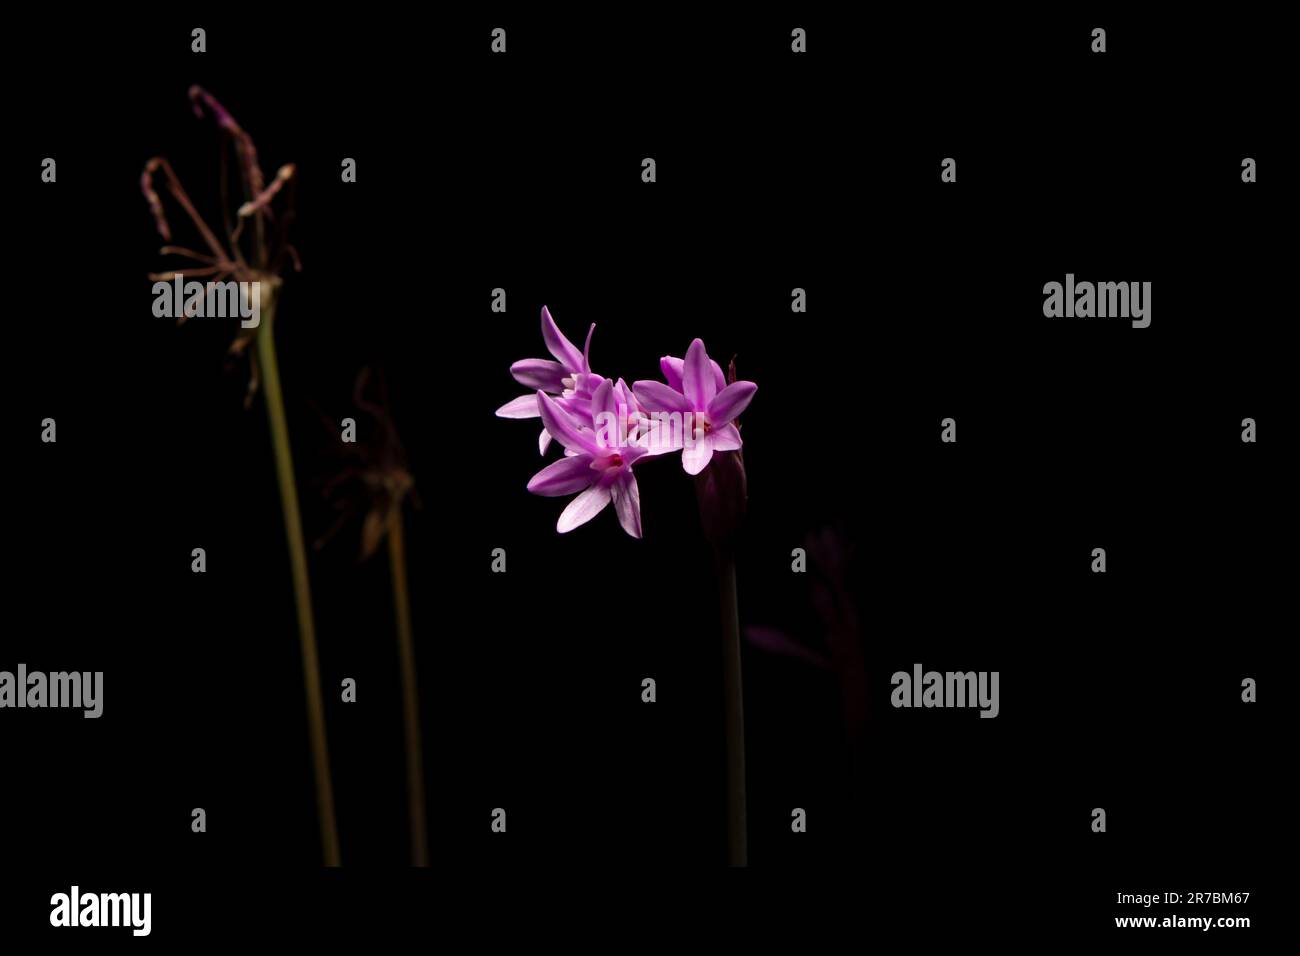 tulbaghia violacea flower on black background Stock Photo